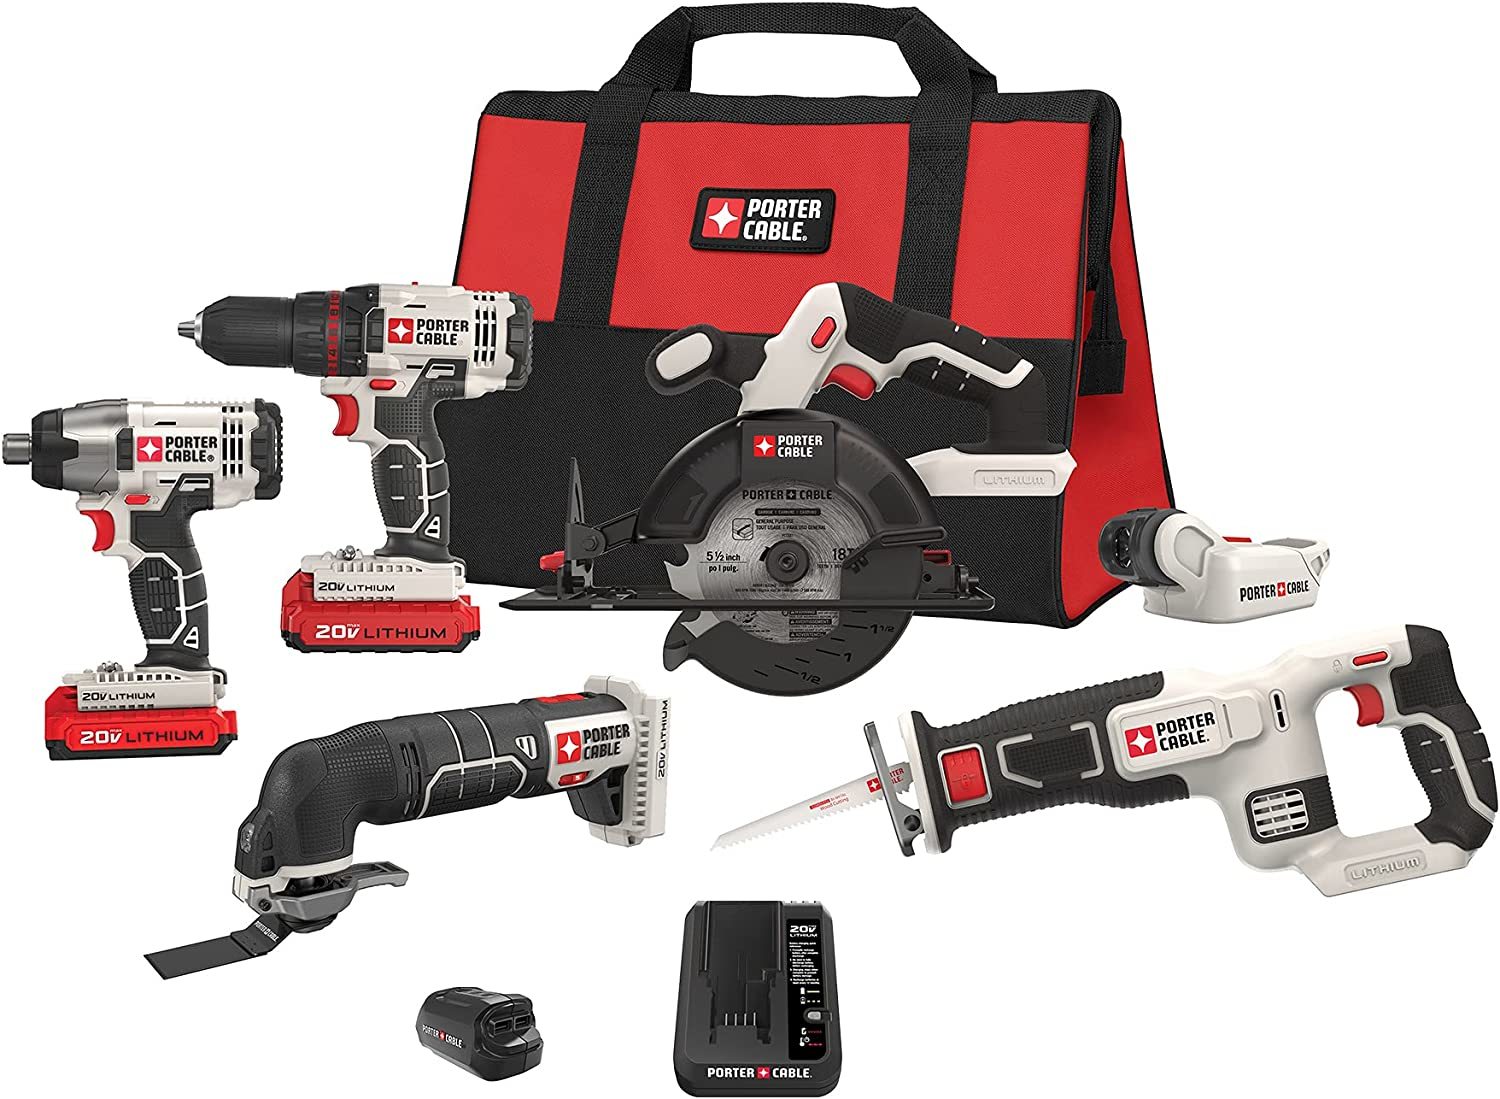 PORTER-CABLE PCCK6118 20V Lithium-Ion Cordless Combo Kit (8 Tools) for sale  online